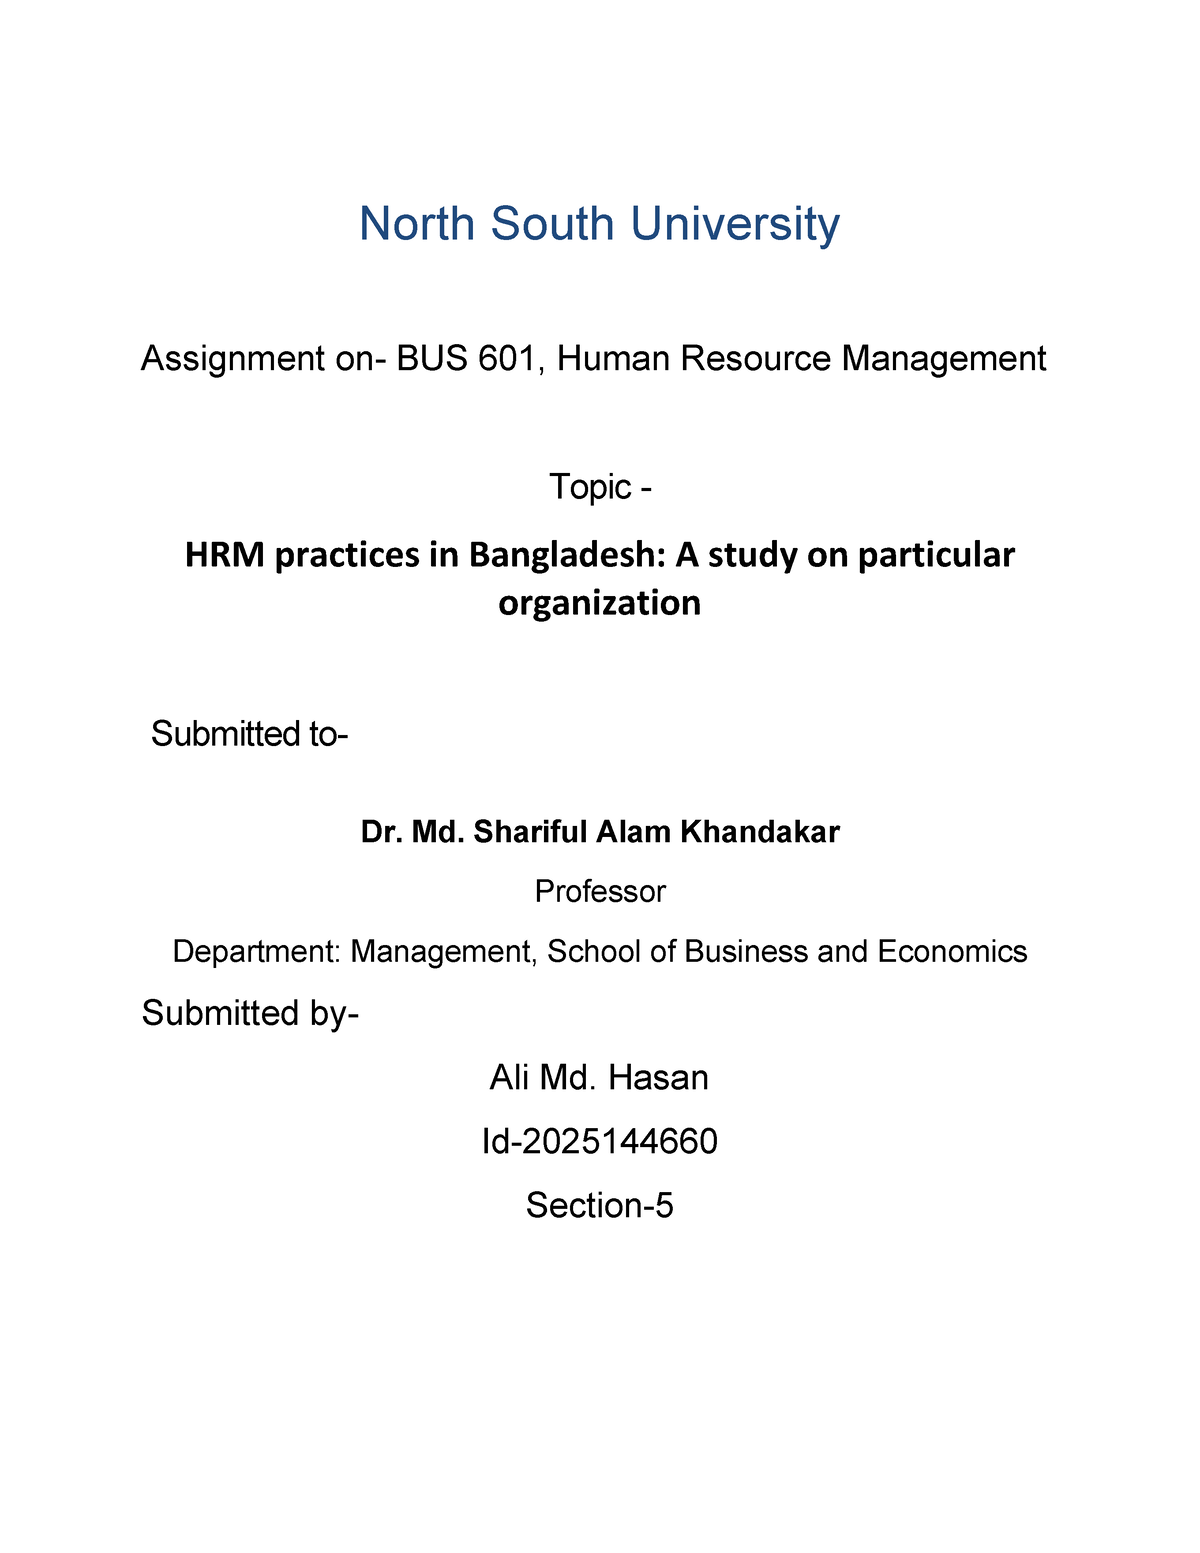 hrm practices in bangladesh assignment